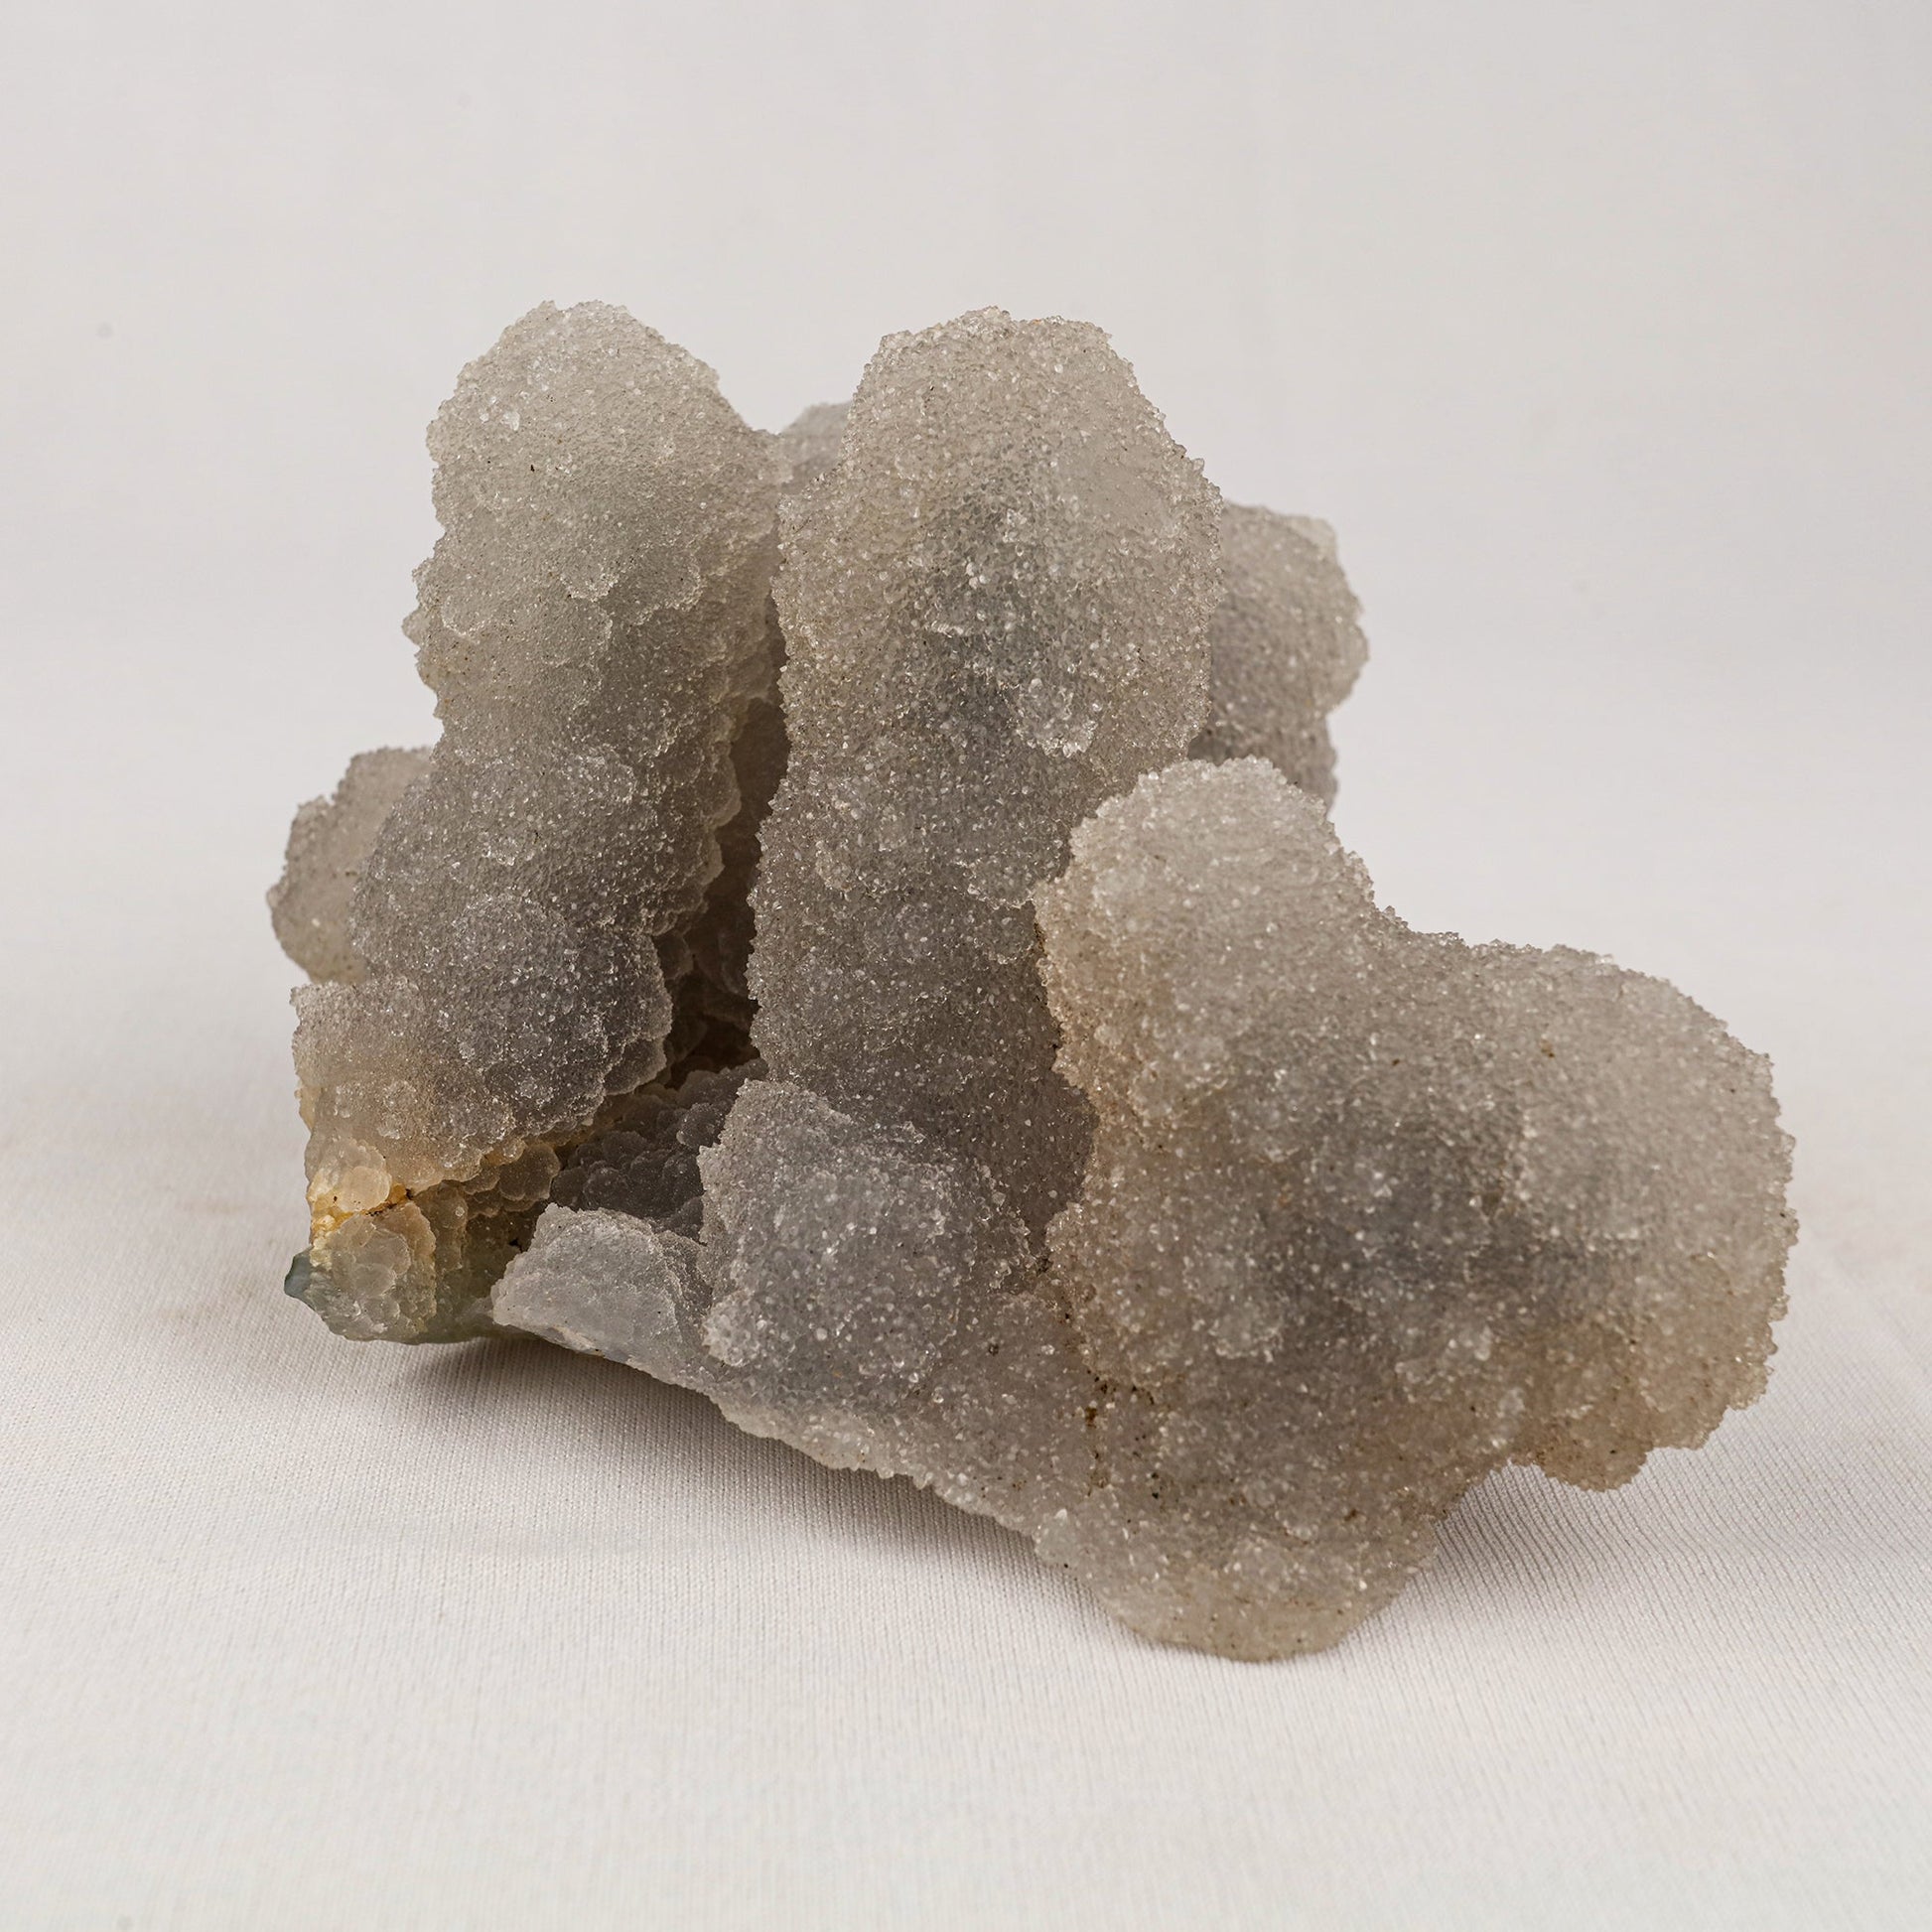 Chalcedony Stalactite Coral Formation Natural Mineral Specimen # B 5536 Chalcedony Superb Minerals 